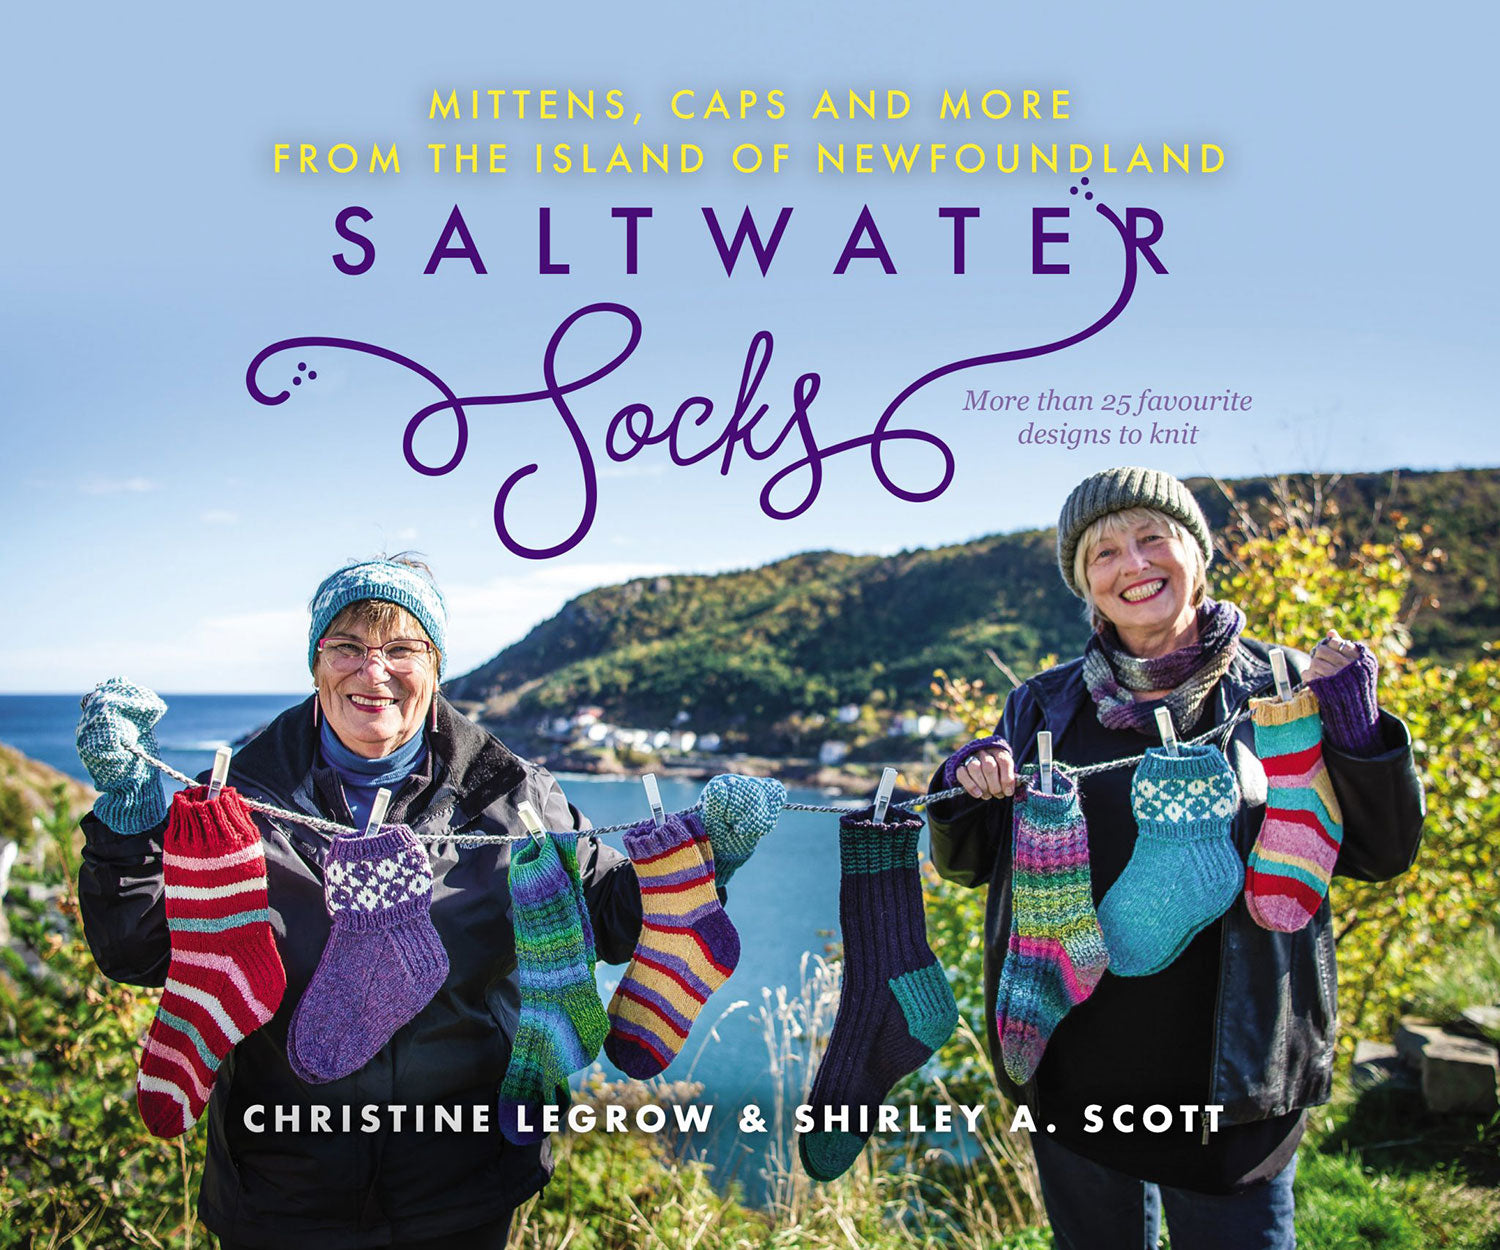 Saltwater Socks: Caps, Mittens, and More from the Island of Newfoundland